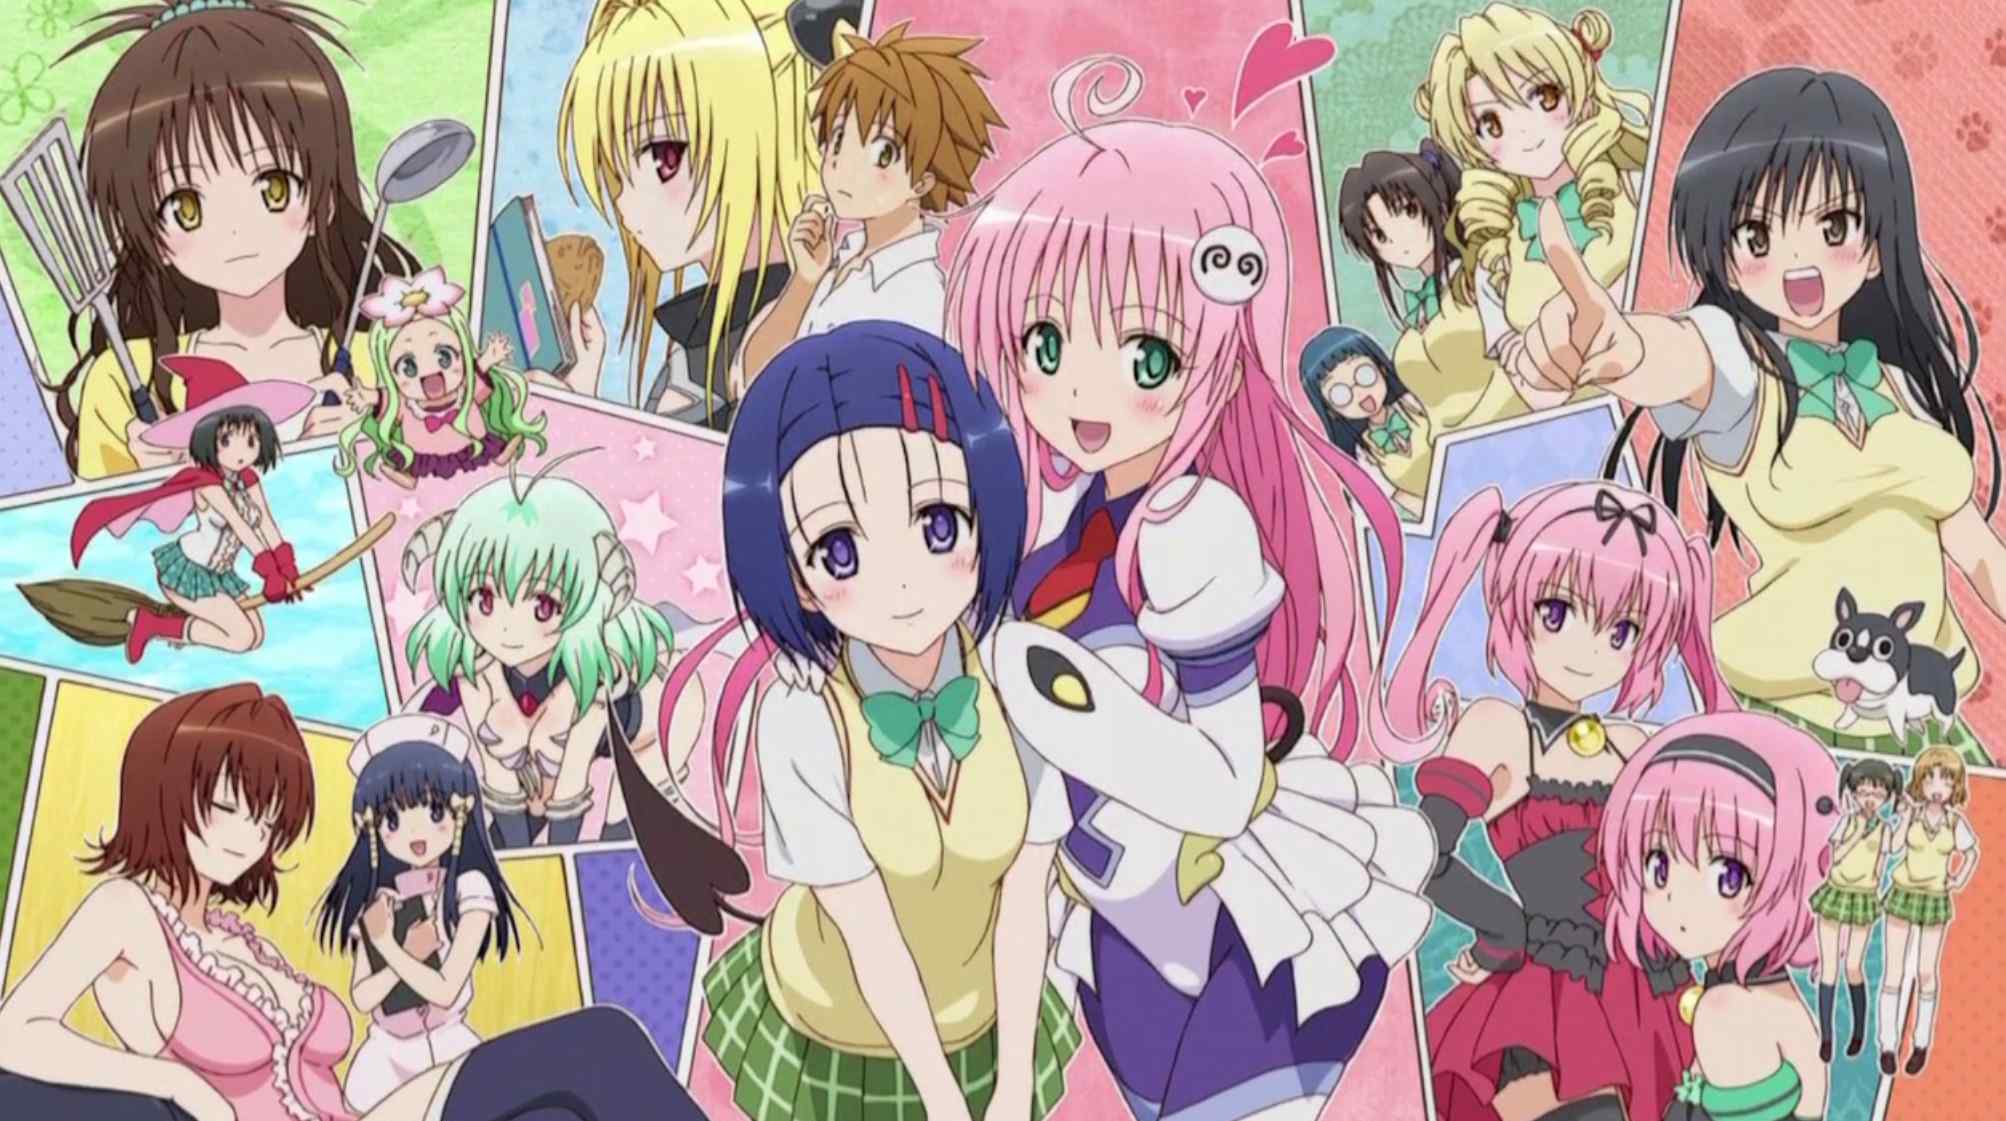 After all, the first thing that comes to mind when one mentions HRM anime is "To Love-Ru.